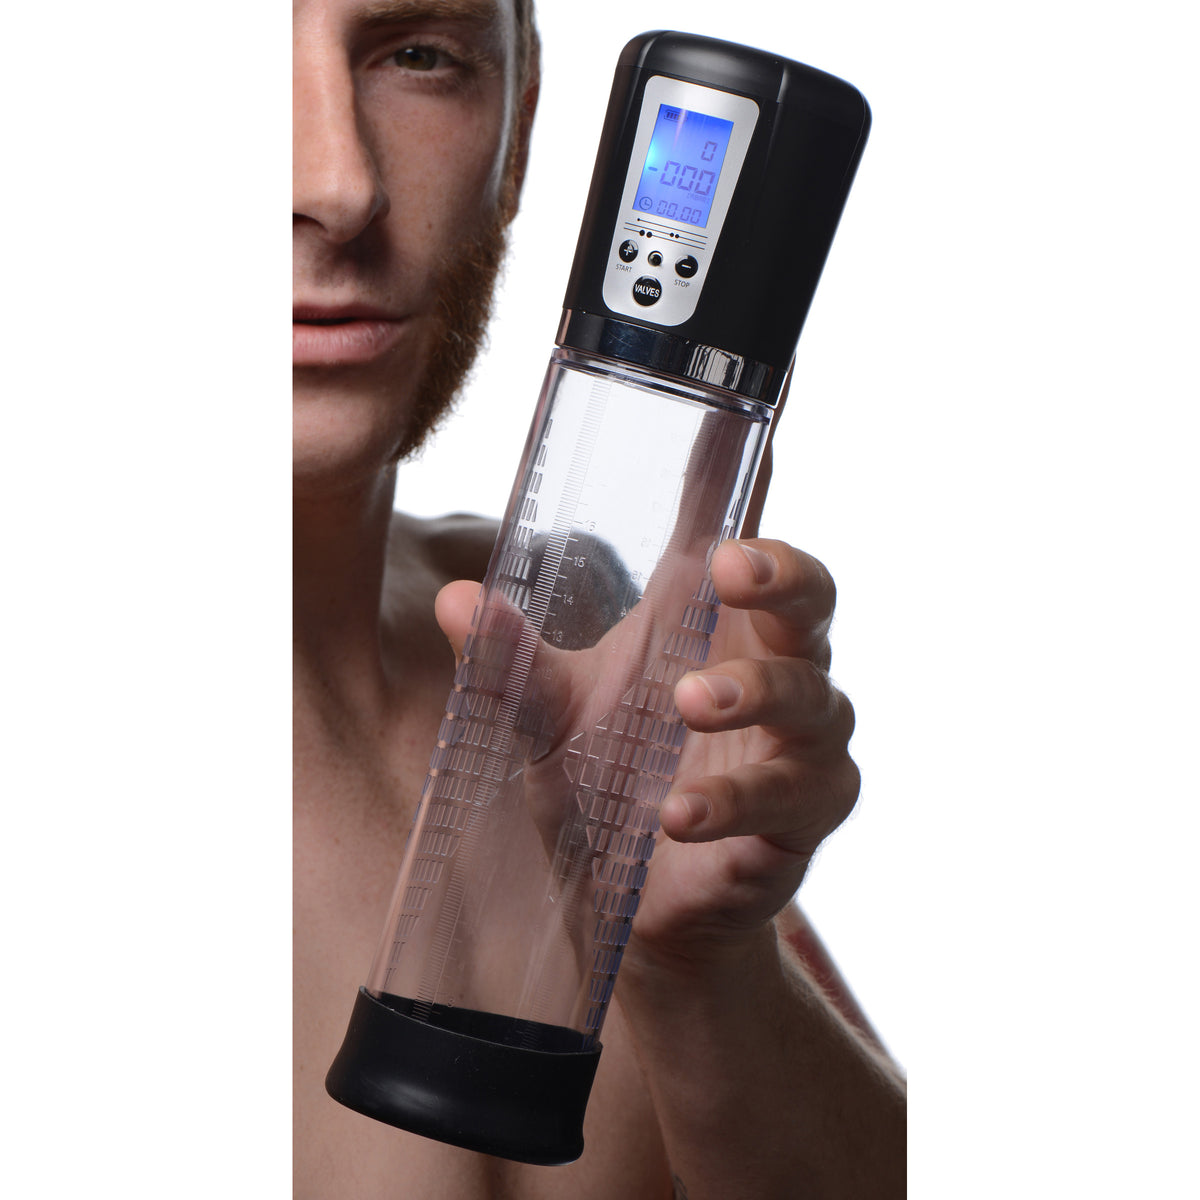 4 Level Power Suction Penis Pump with Built-in Display